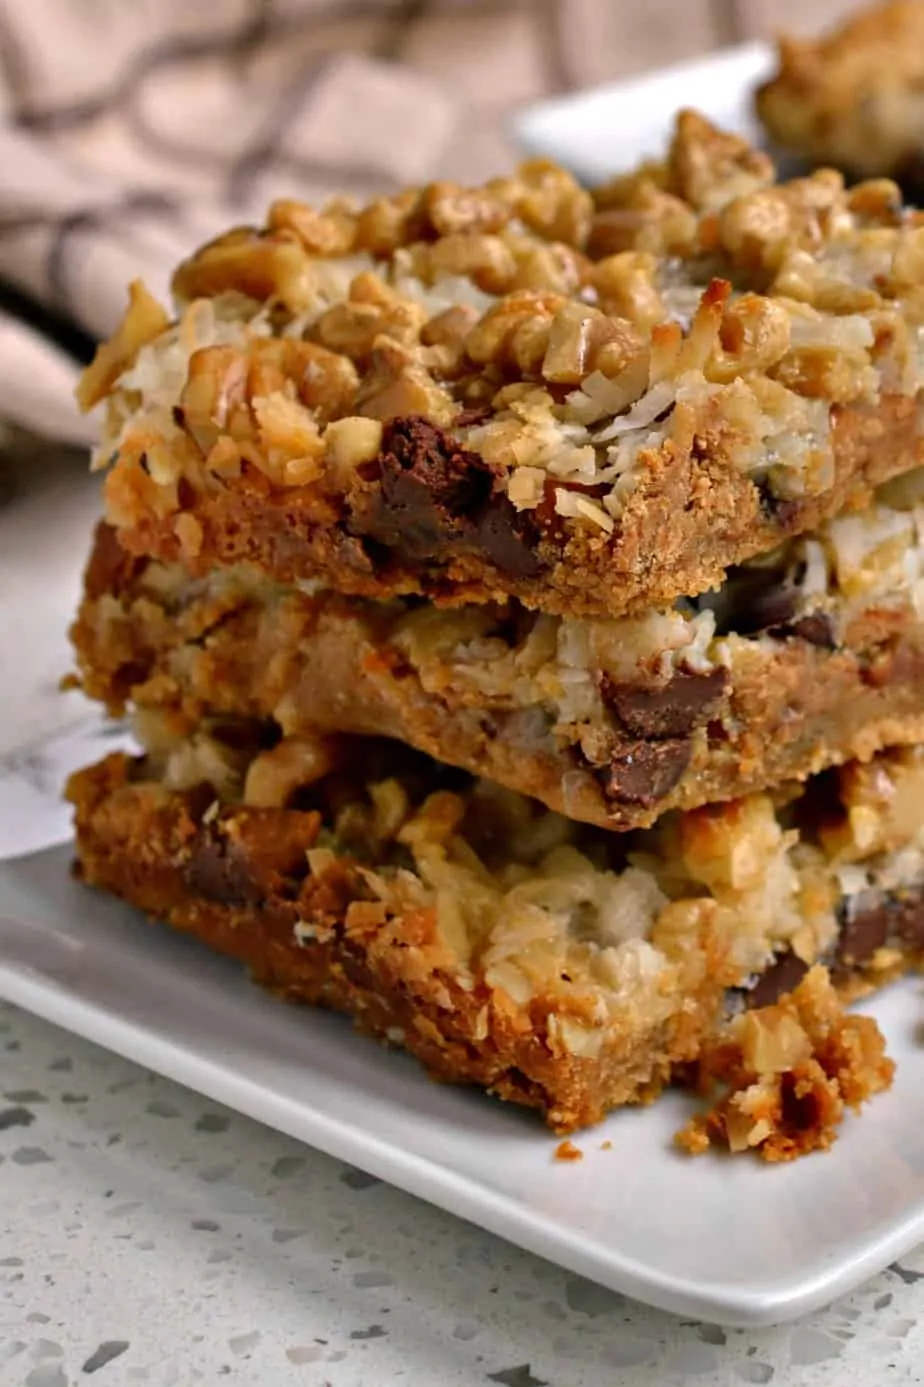 Fun, easy and delectable these Magic Cookie Bars will be a hit at your next party, potluck or family reunion.